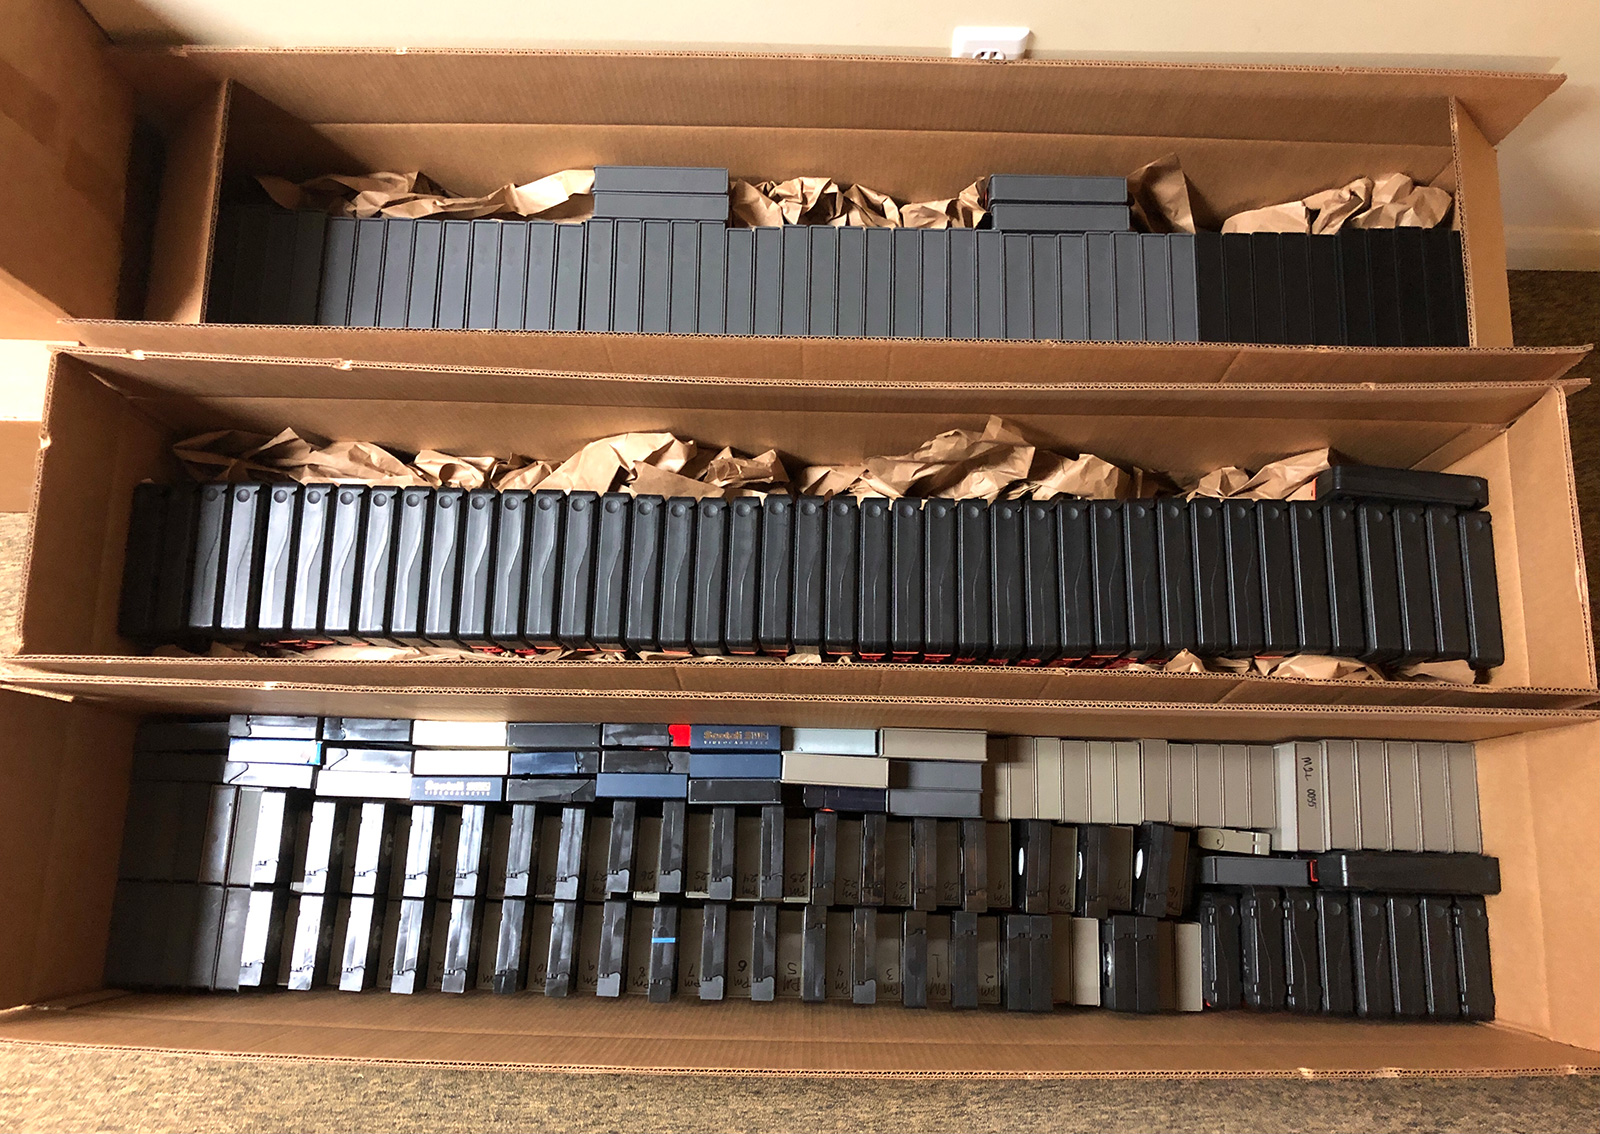 Boxes containing Tex Murphy video tapes. Three long boxes filled with many cassette tapes.